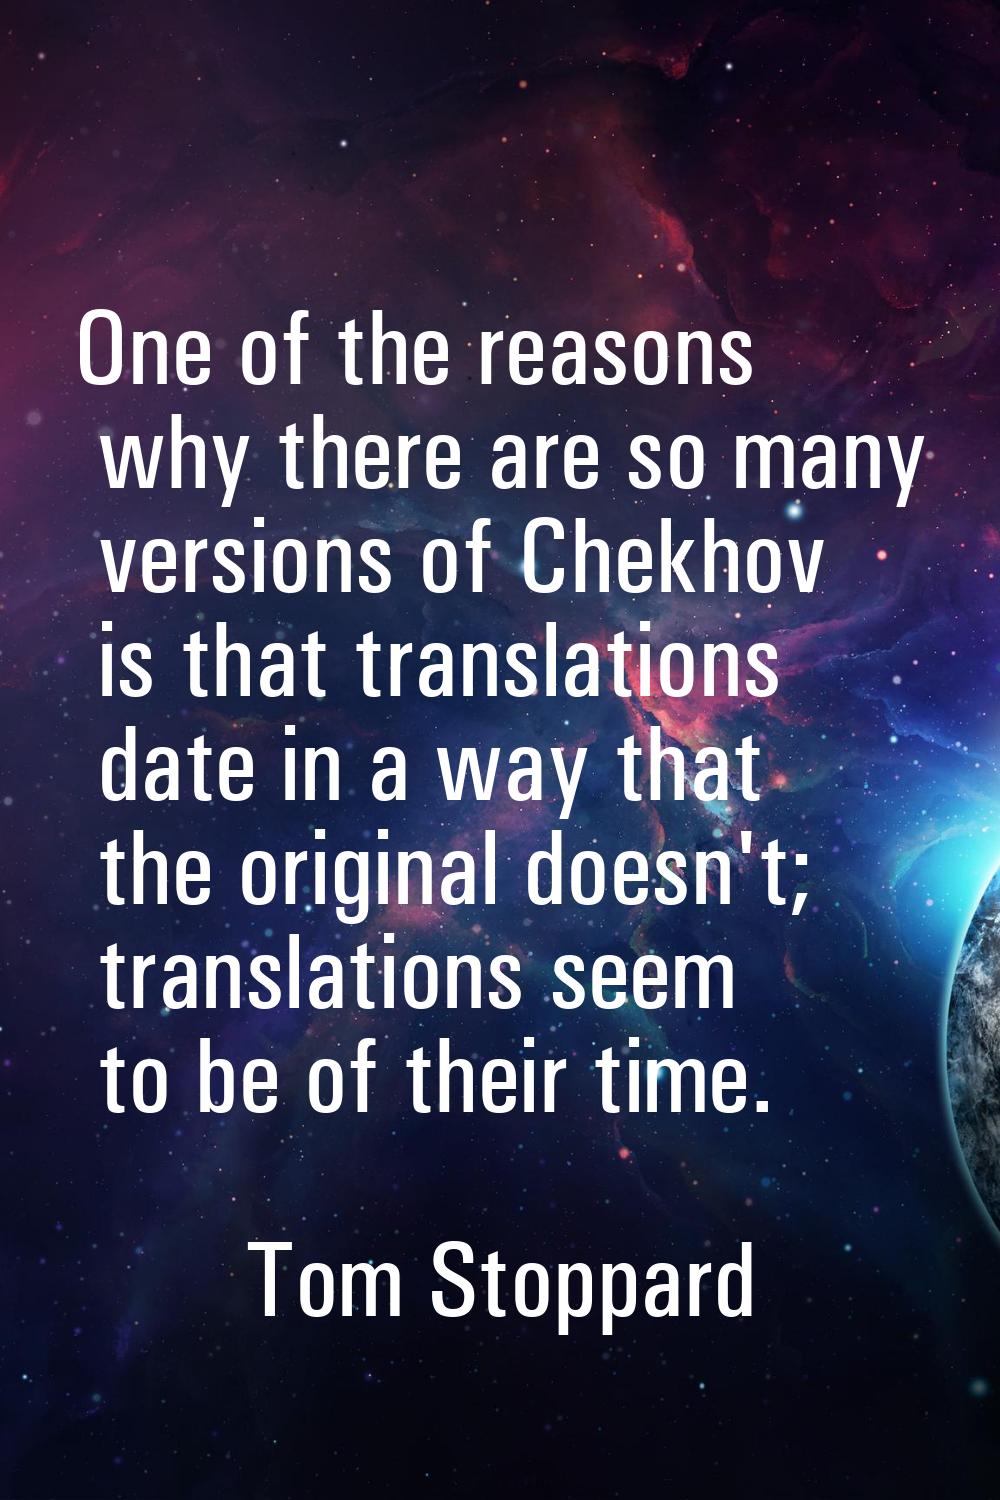 One of the reasons why there are so many versions of Chekhov is that translations date in a way tha